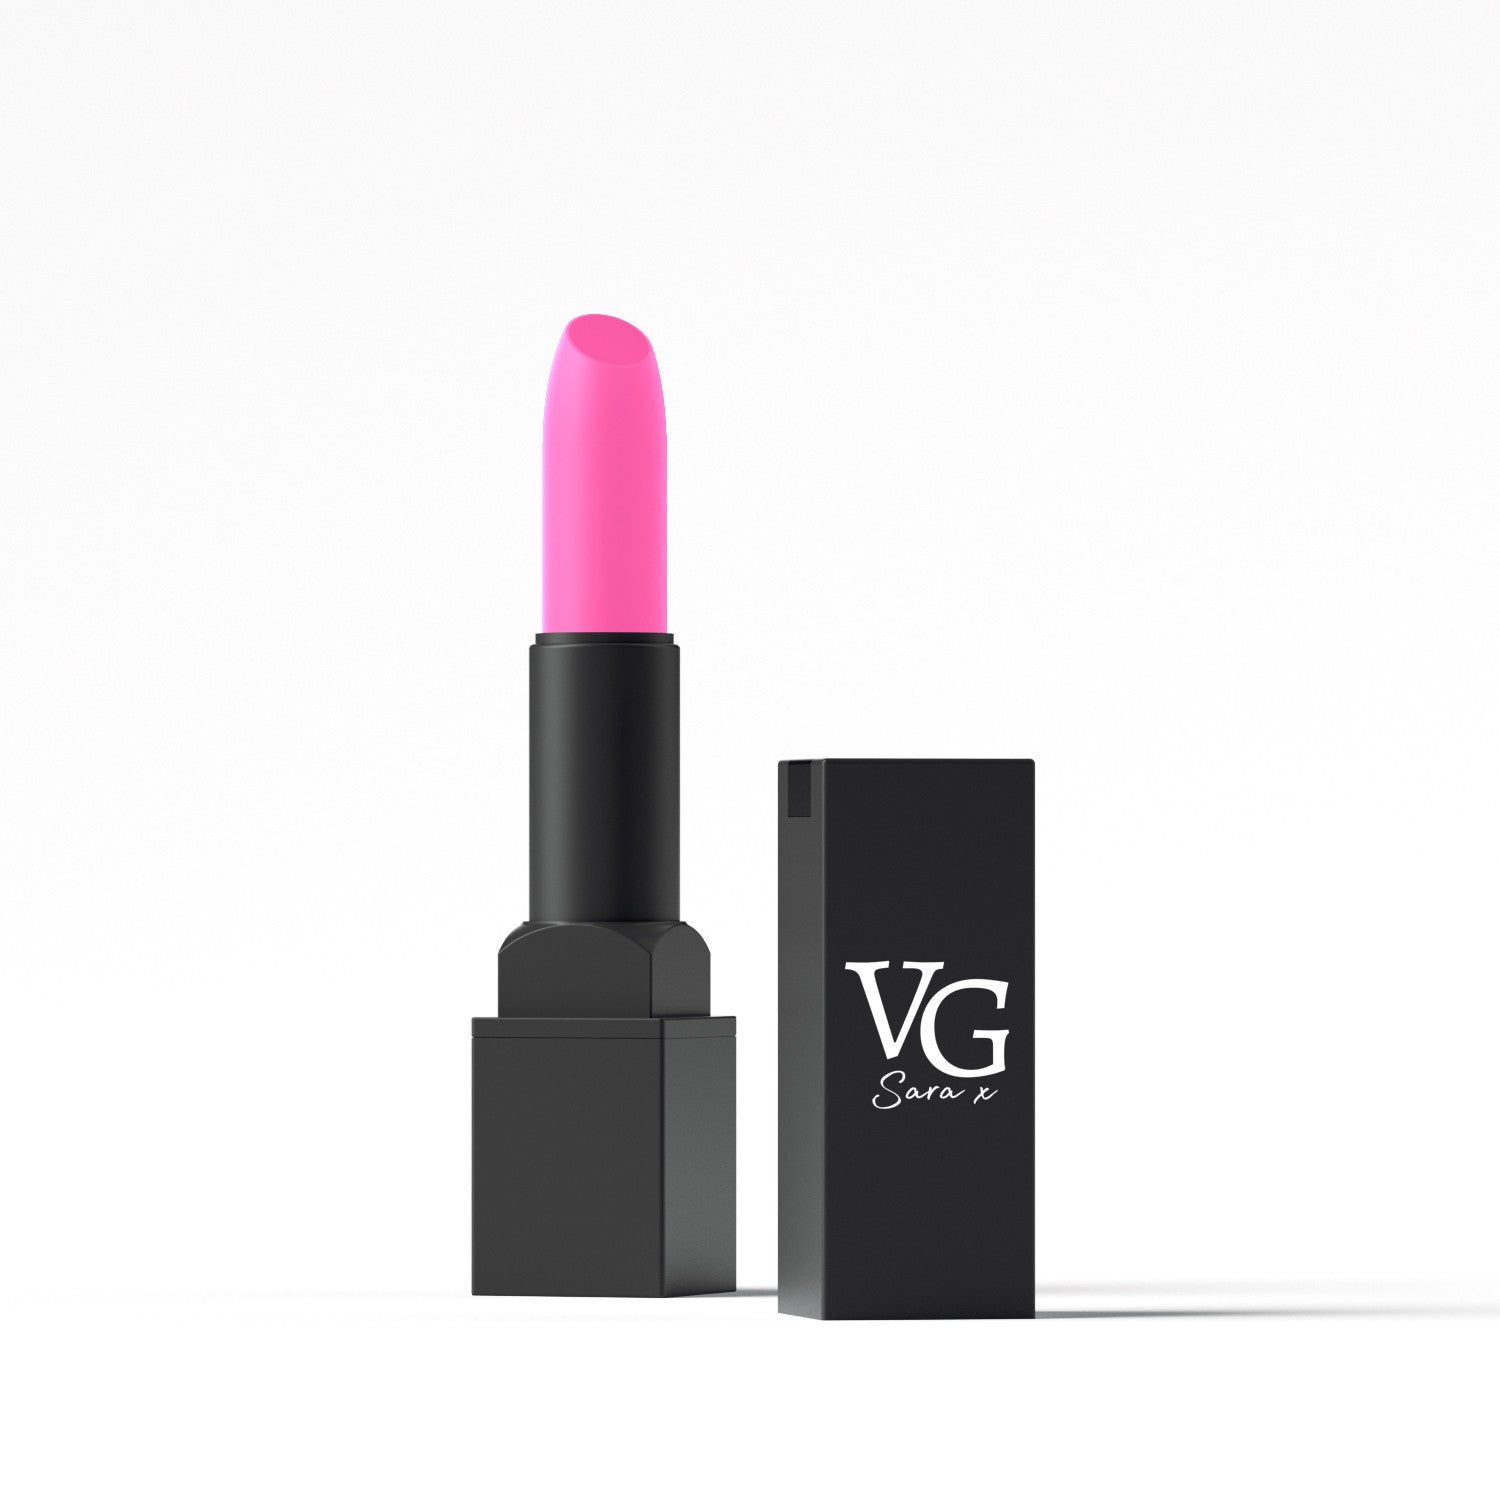 VG Cosmetics lipstick with vitamin E and brand detail